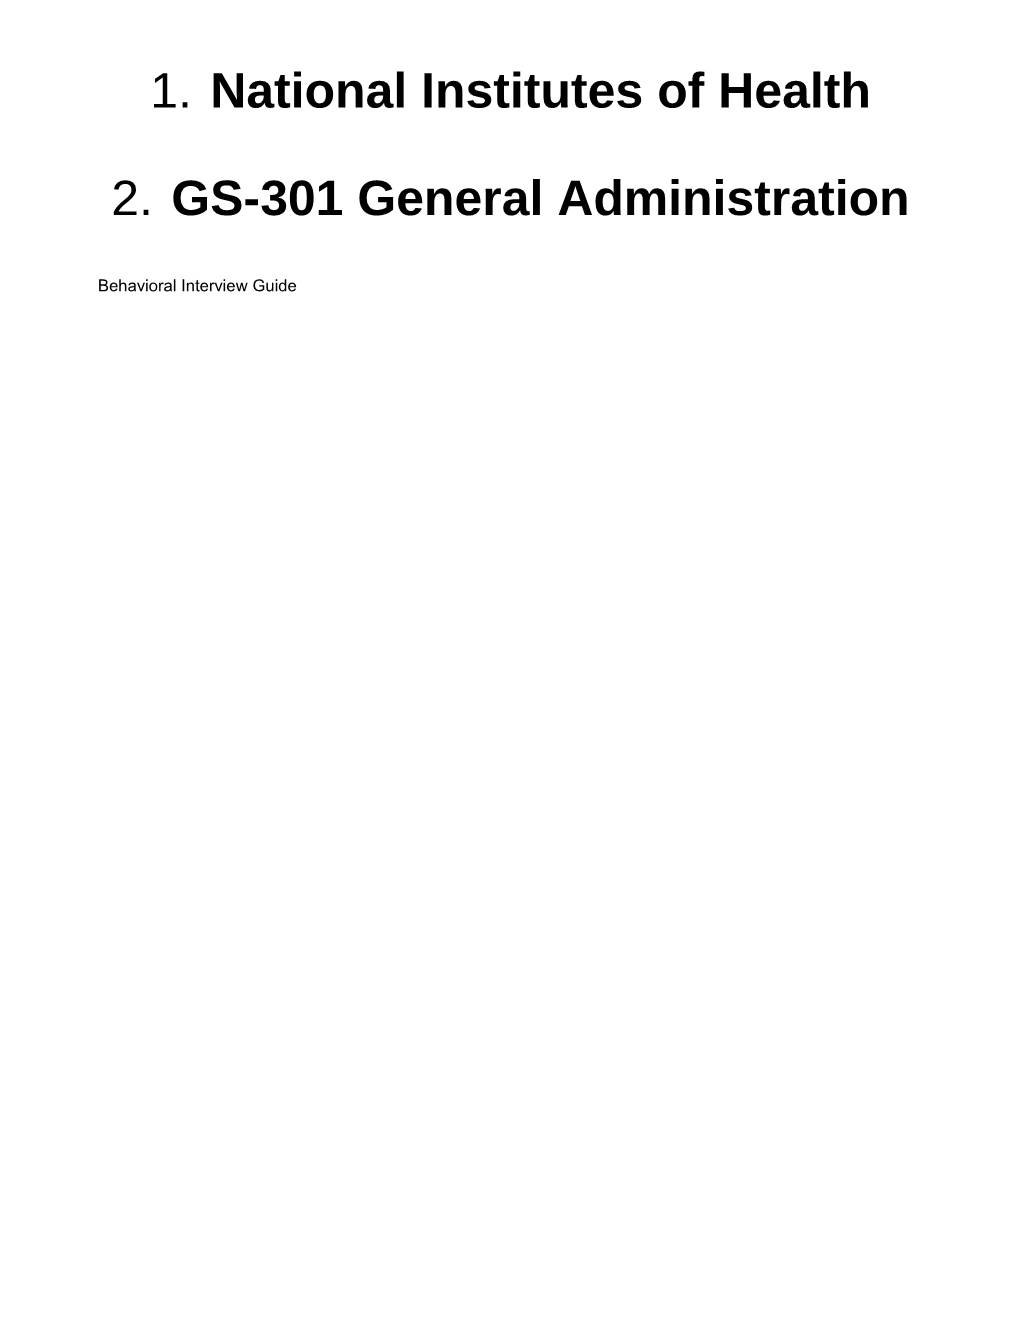 NIH Behavioral Interview Guide GS-301 General Administration